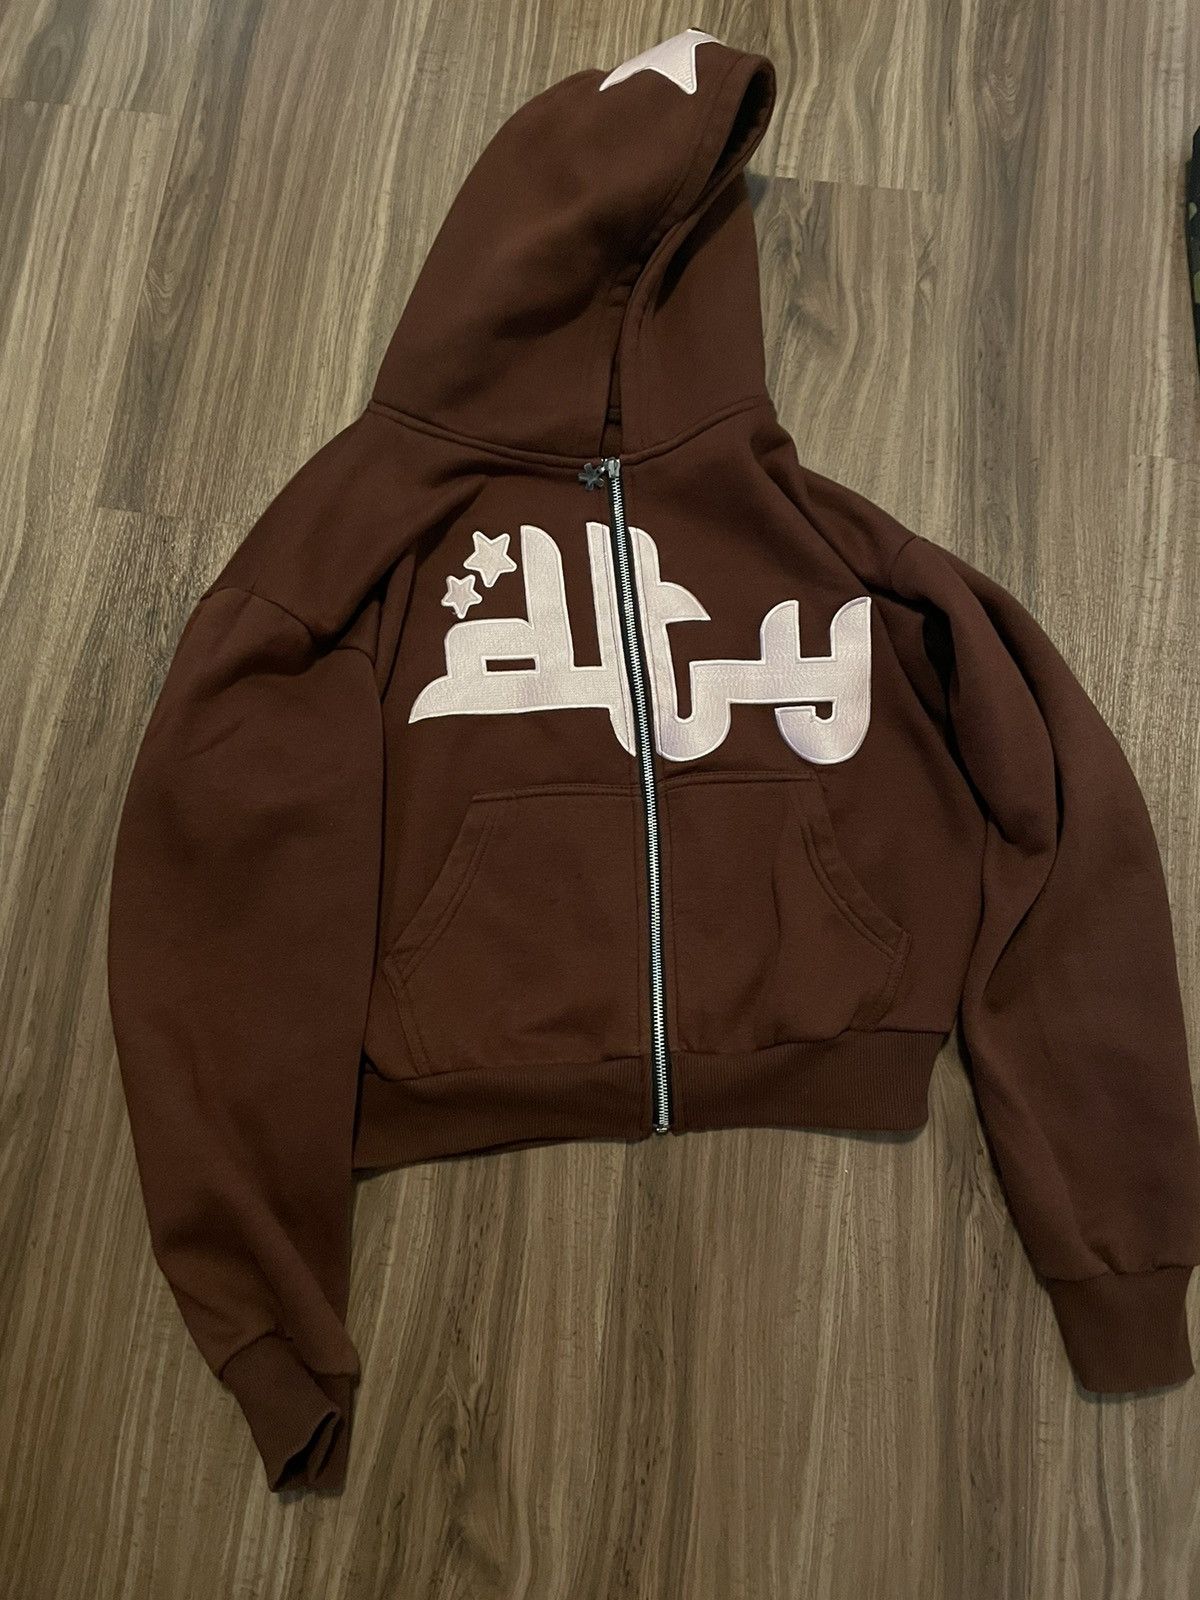 Divide The Youth Divide the youth zip up | Grailed